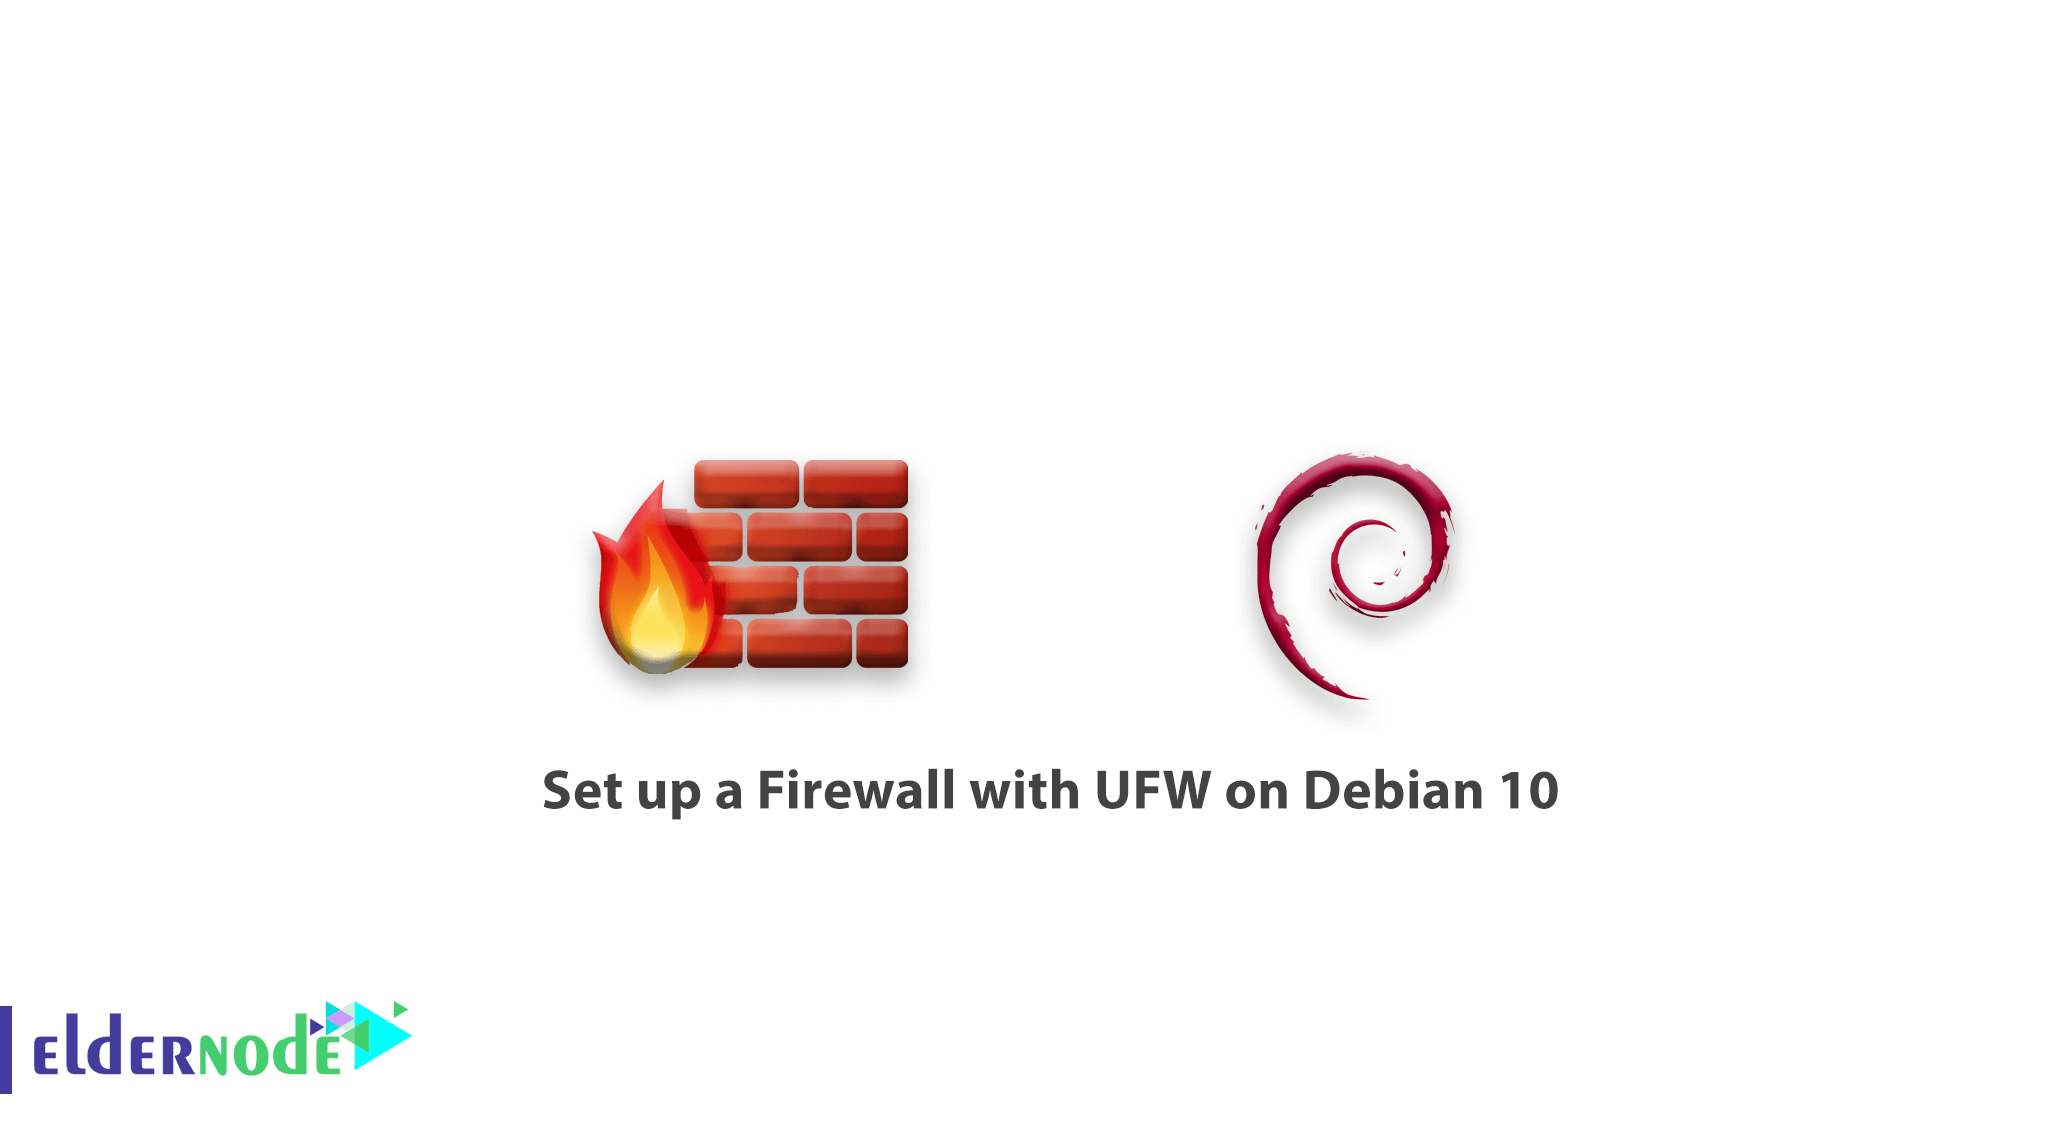 How to set up a Firewall with UFW on Debian 10